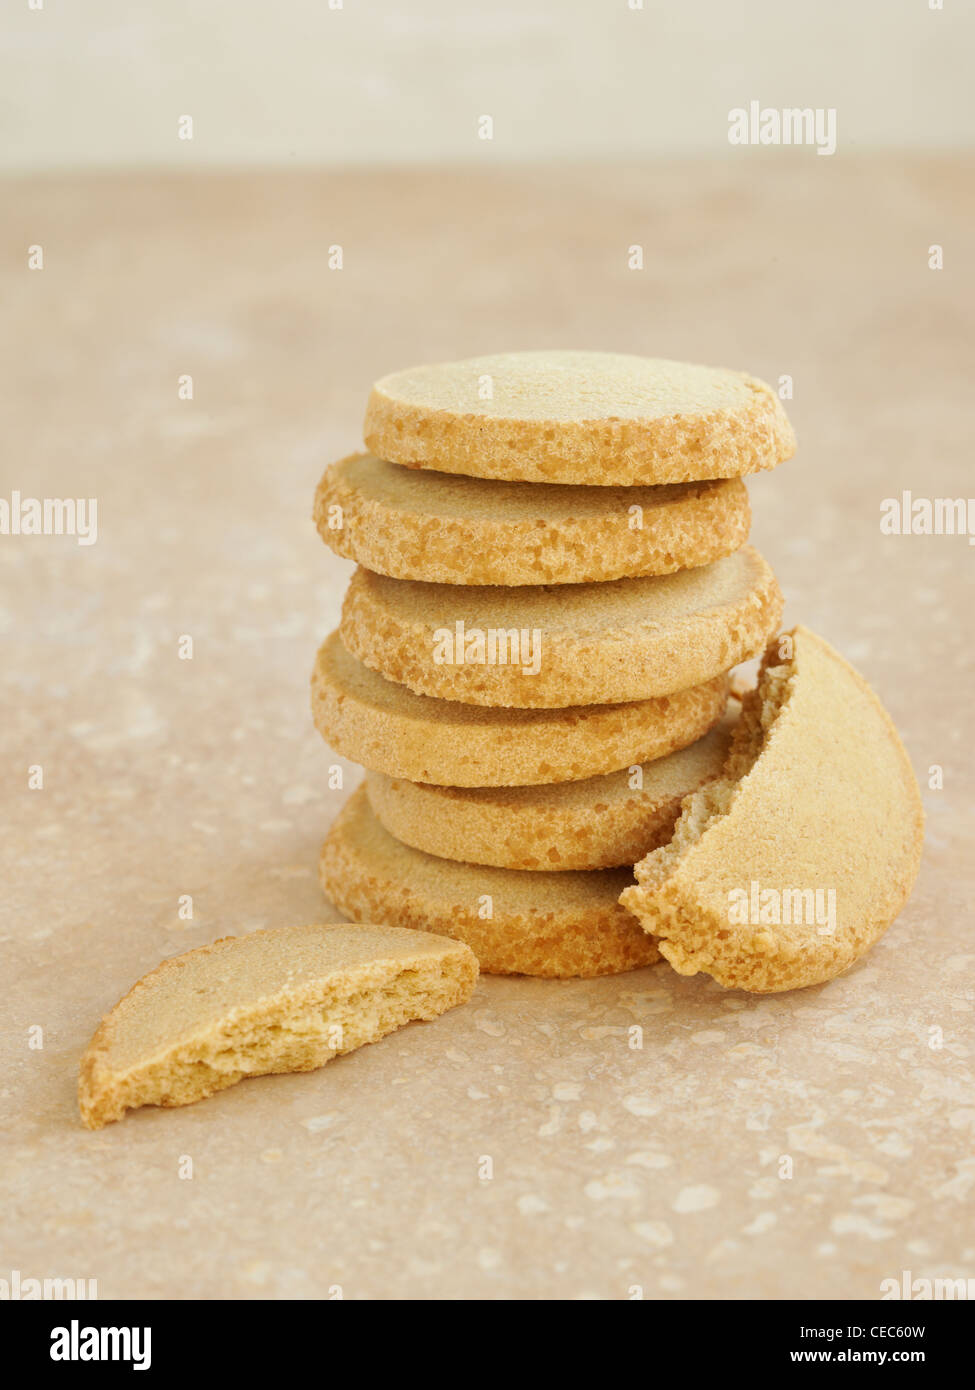 demerera sugar shortbread biscuits piled up Stock Photo